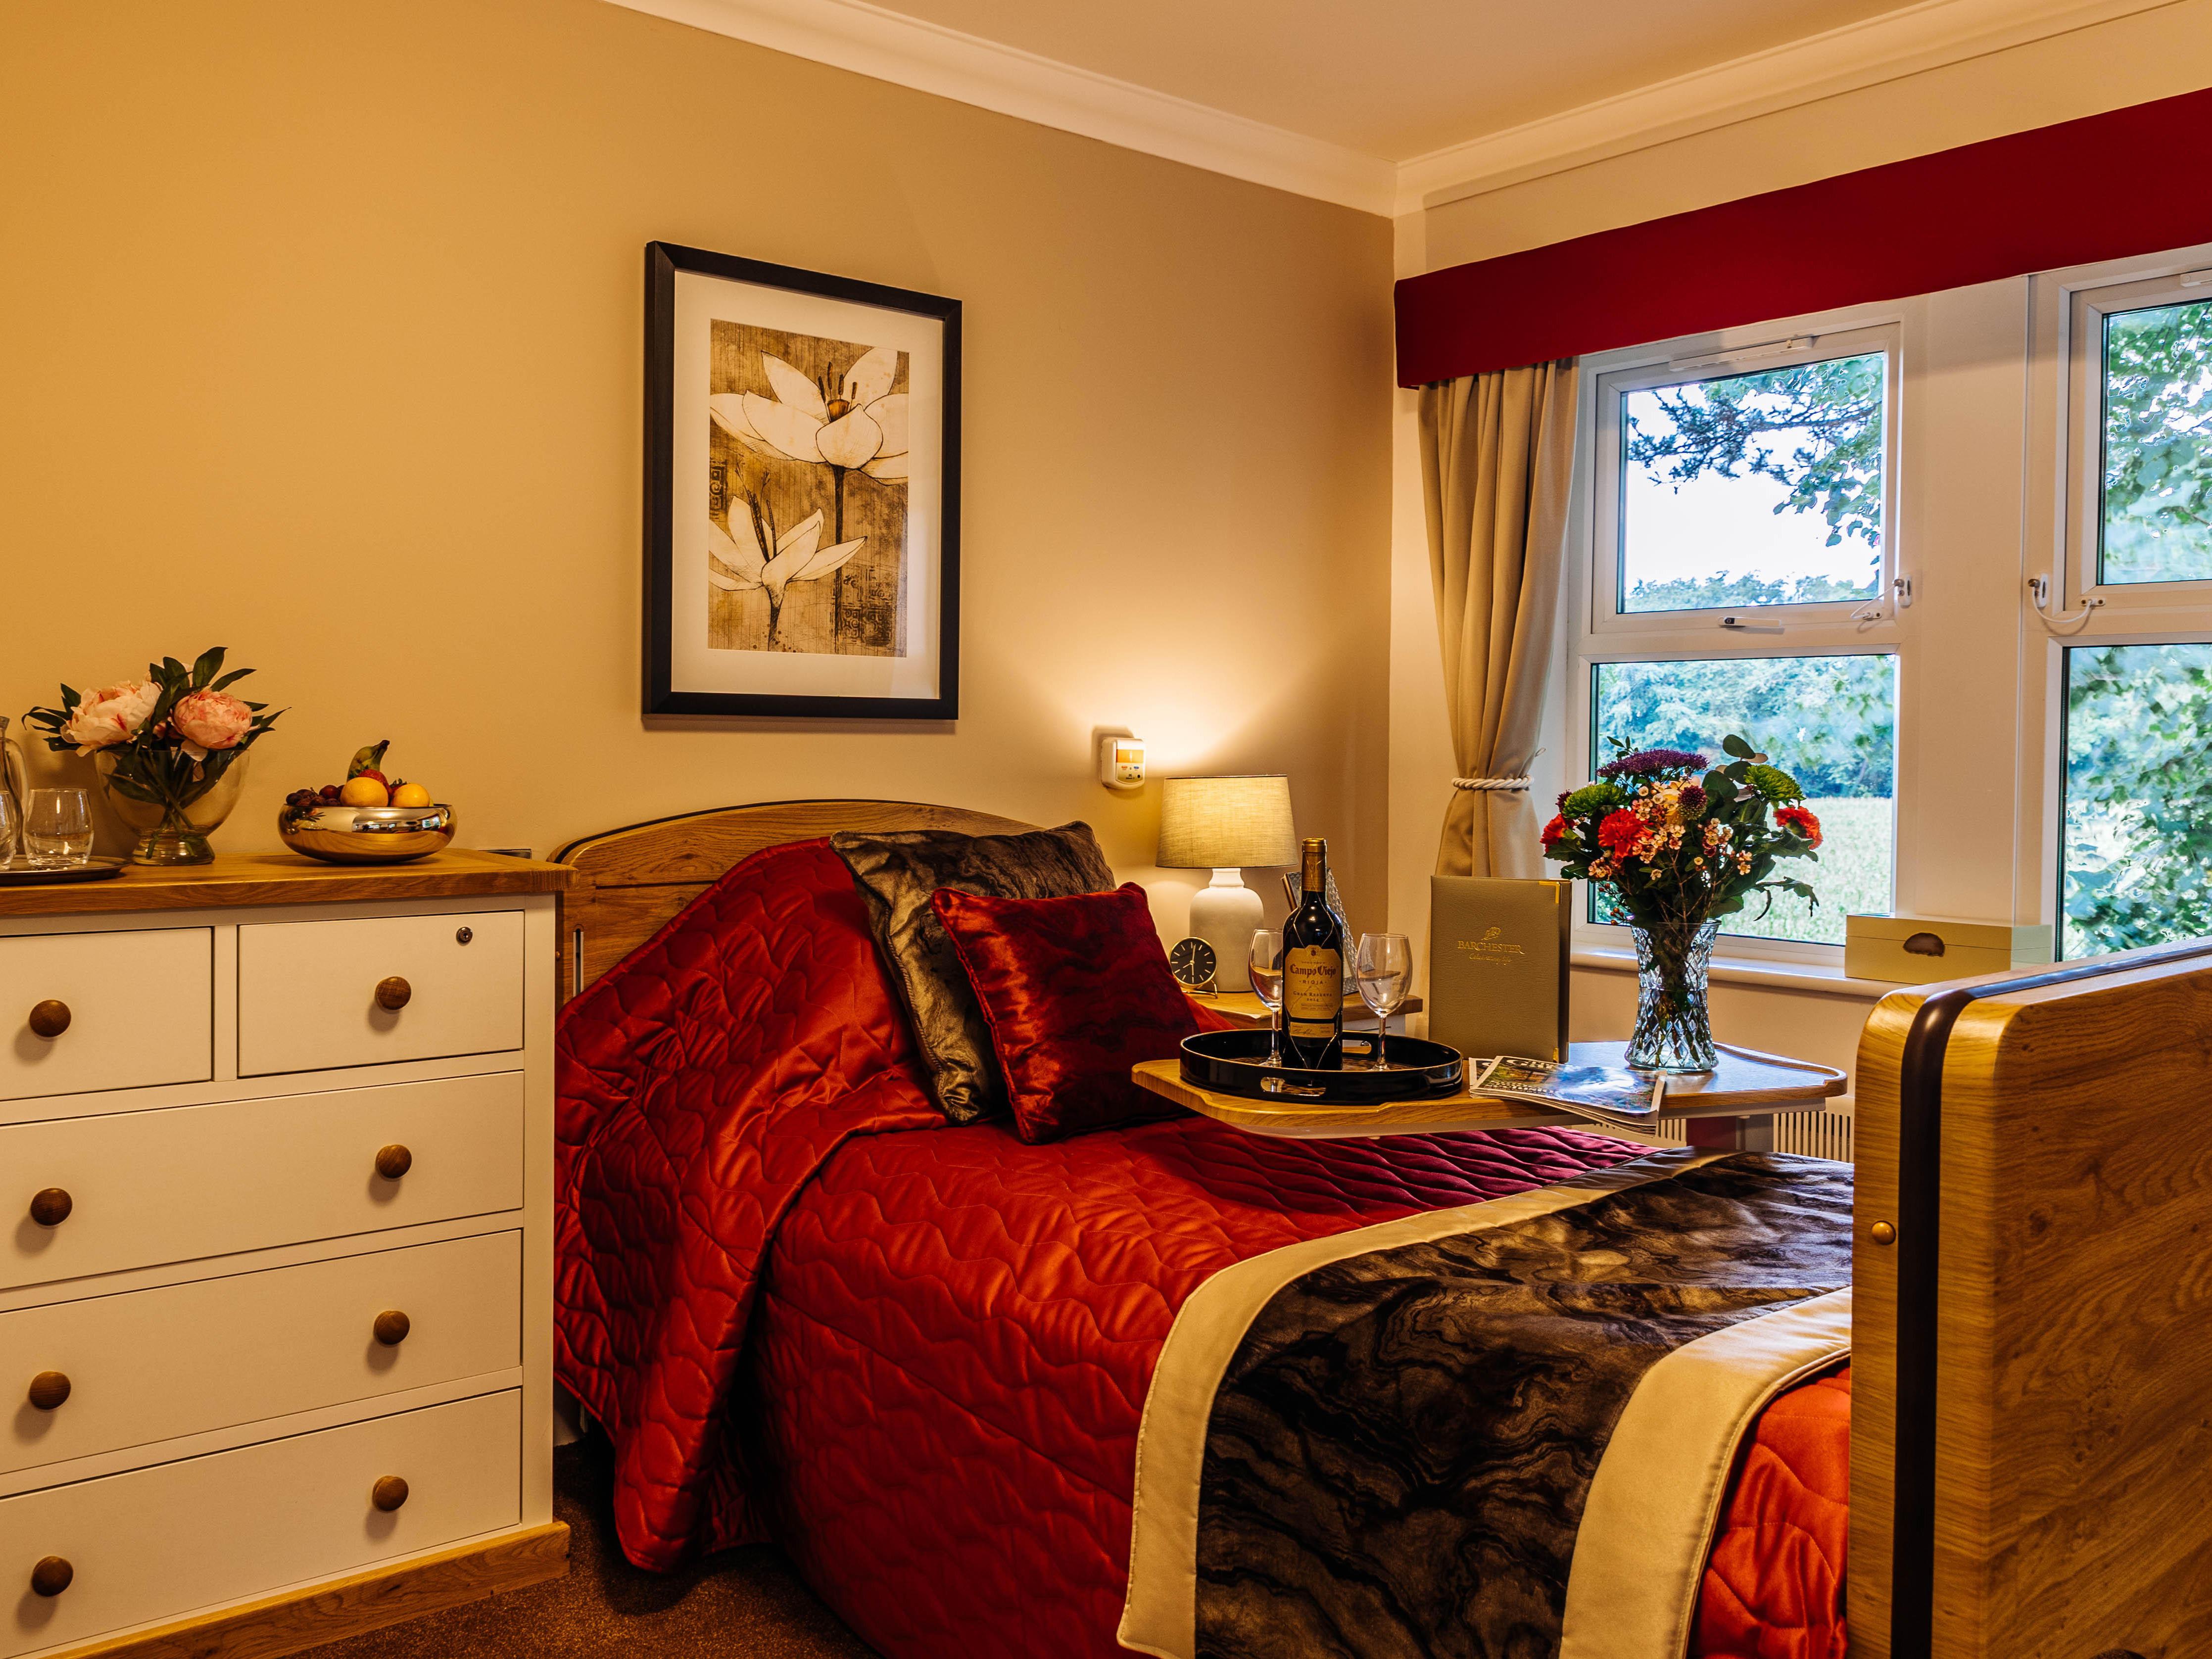 Images Barchester - Boroughbridge Manor and Lodge Care Home